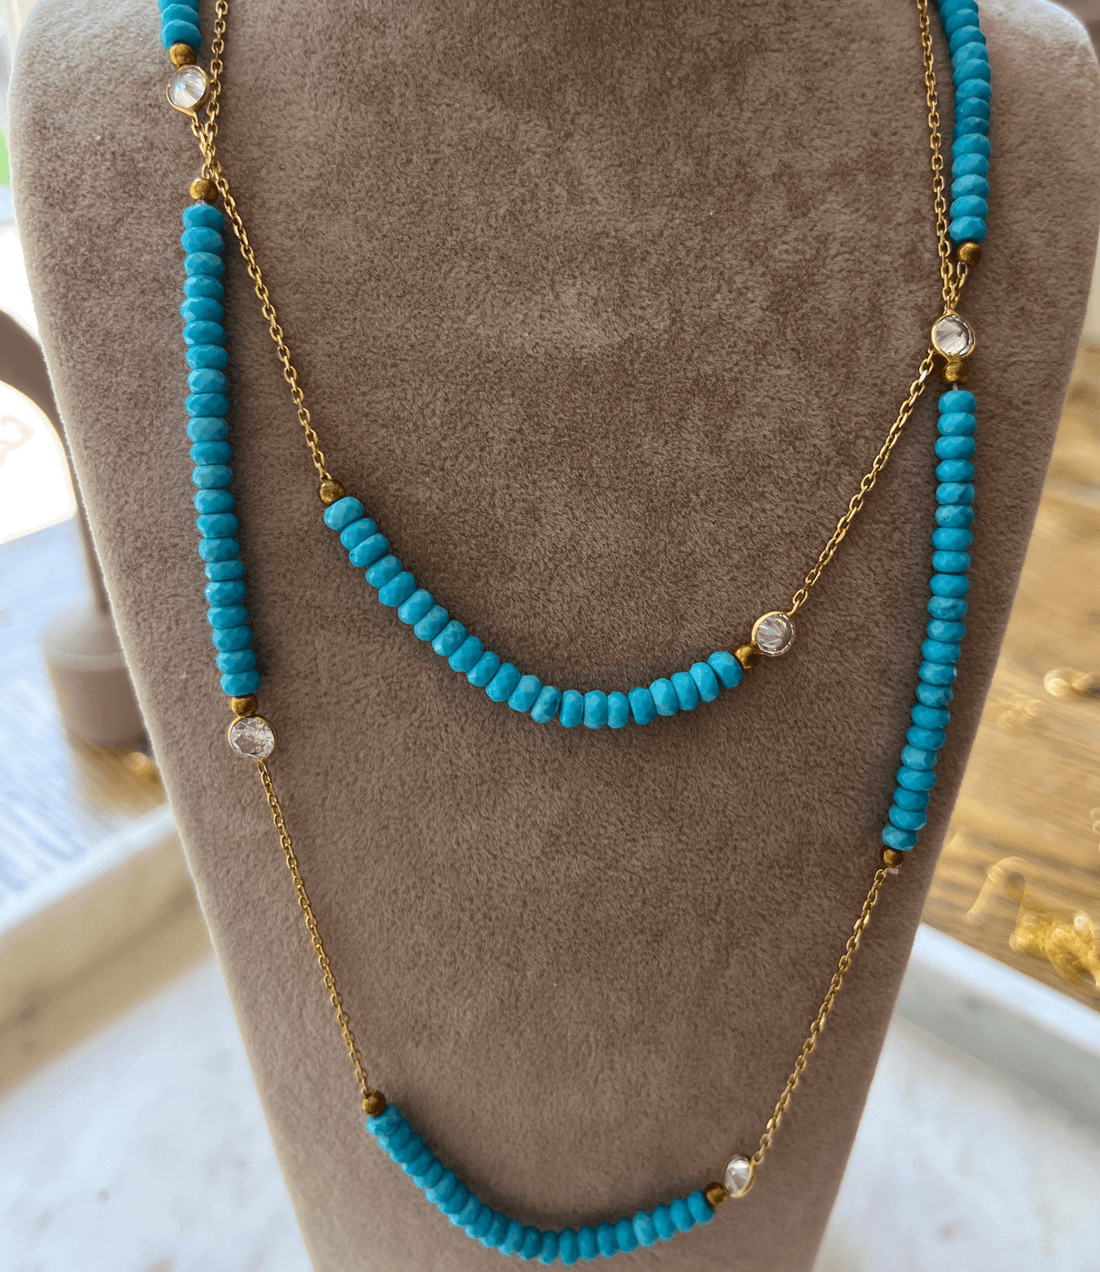 Turquoise & Crystal Long Necklace